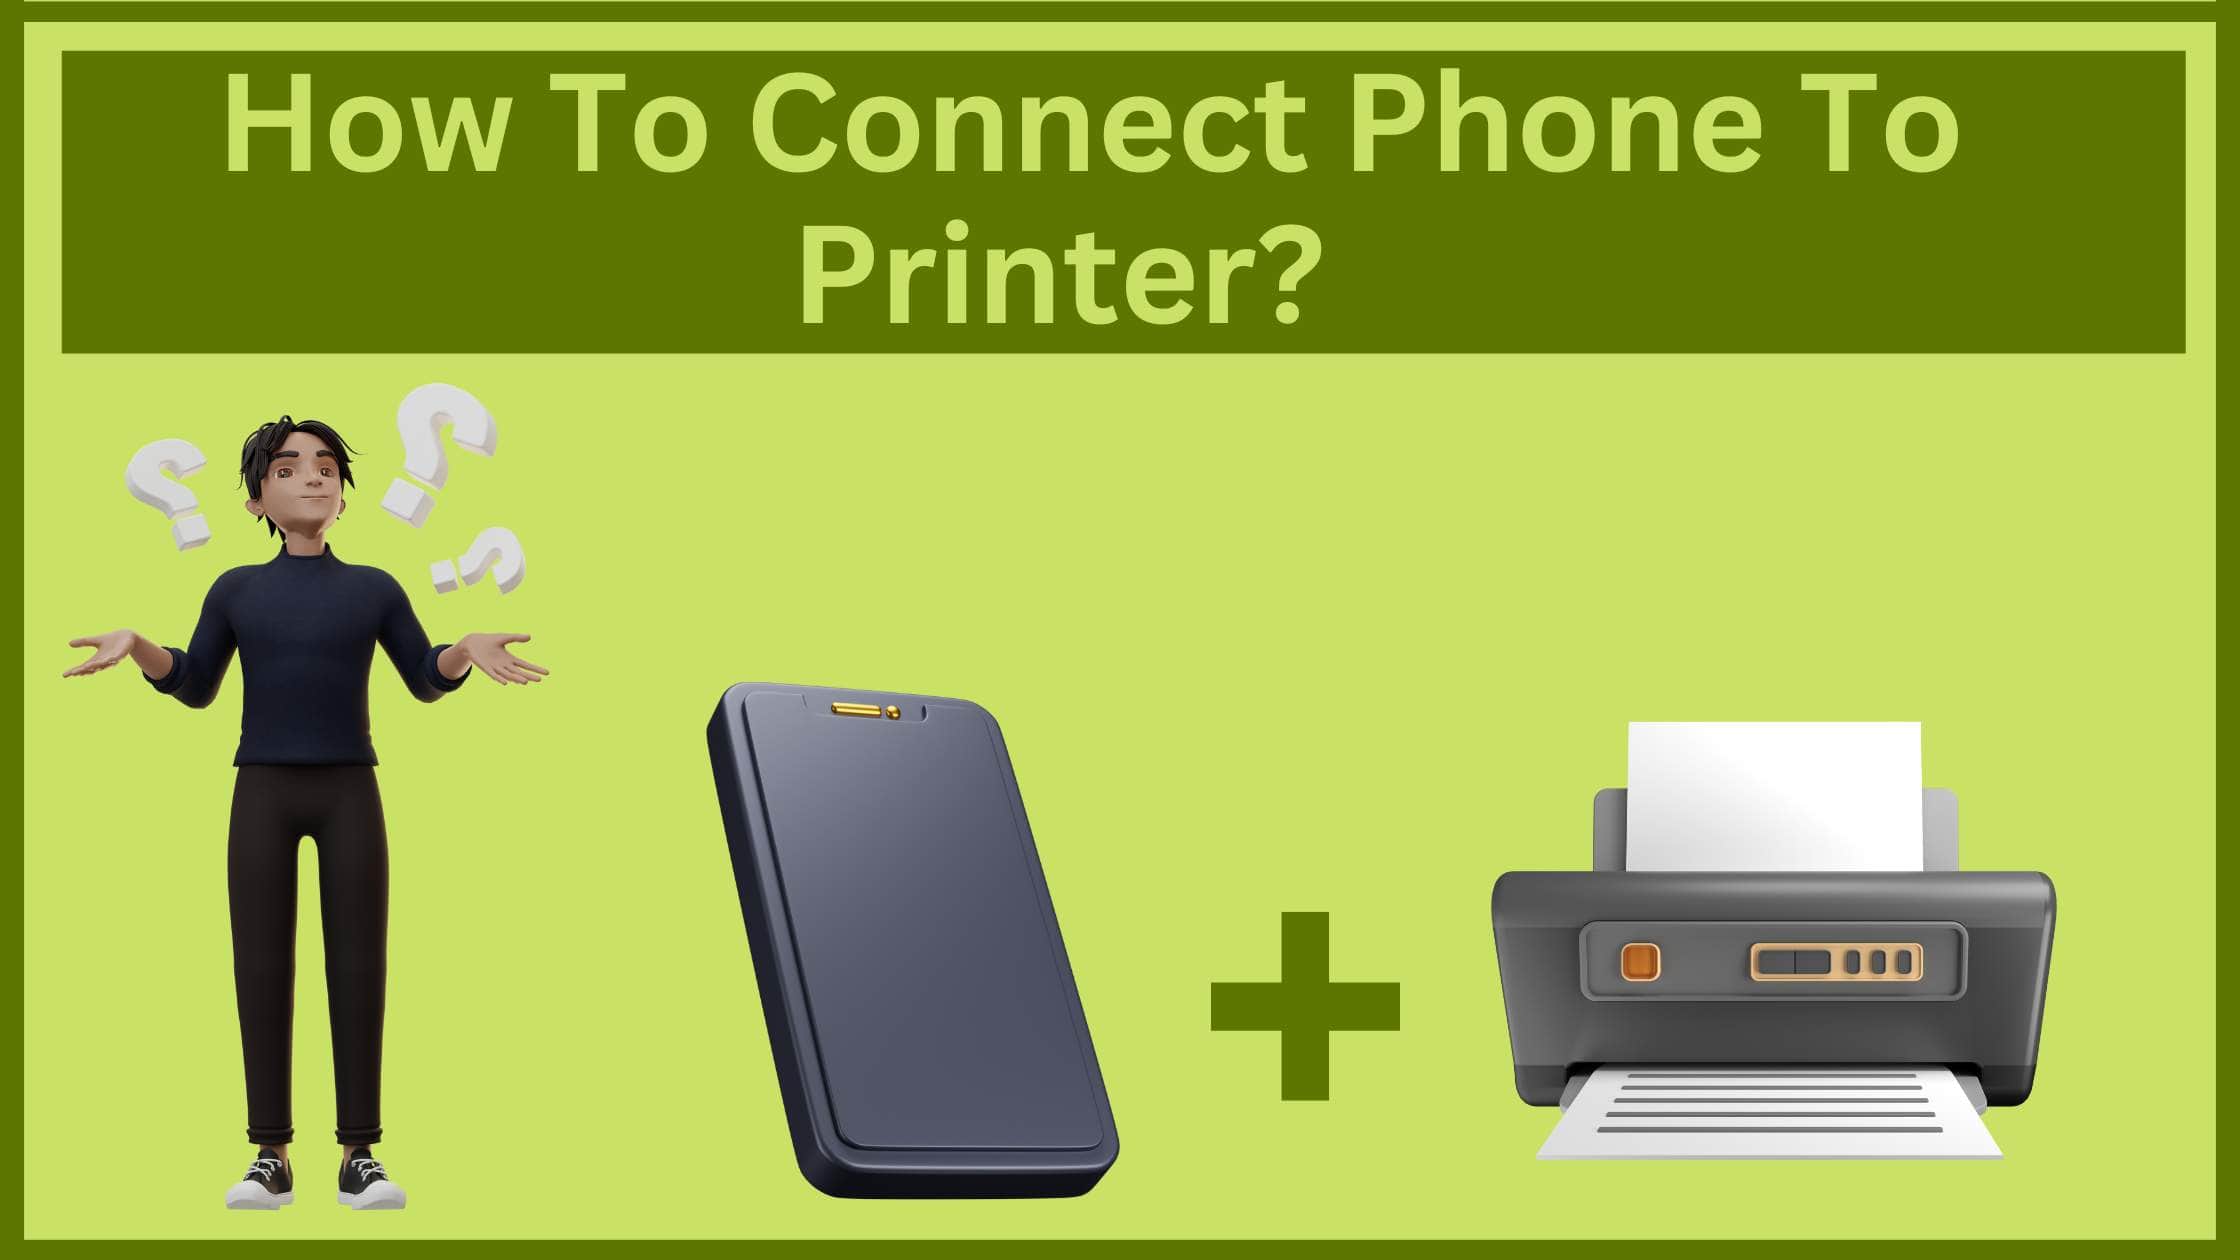 steps to connect phone to printer